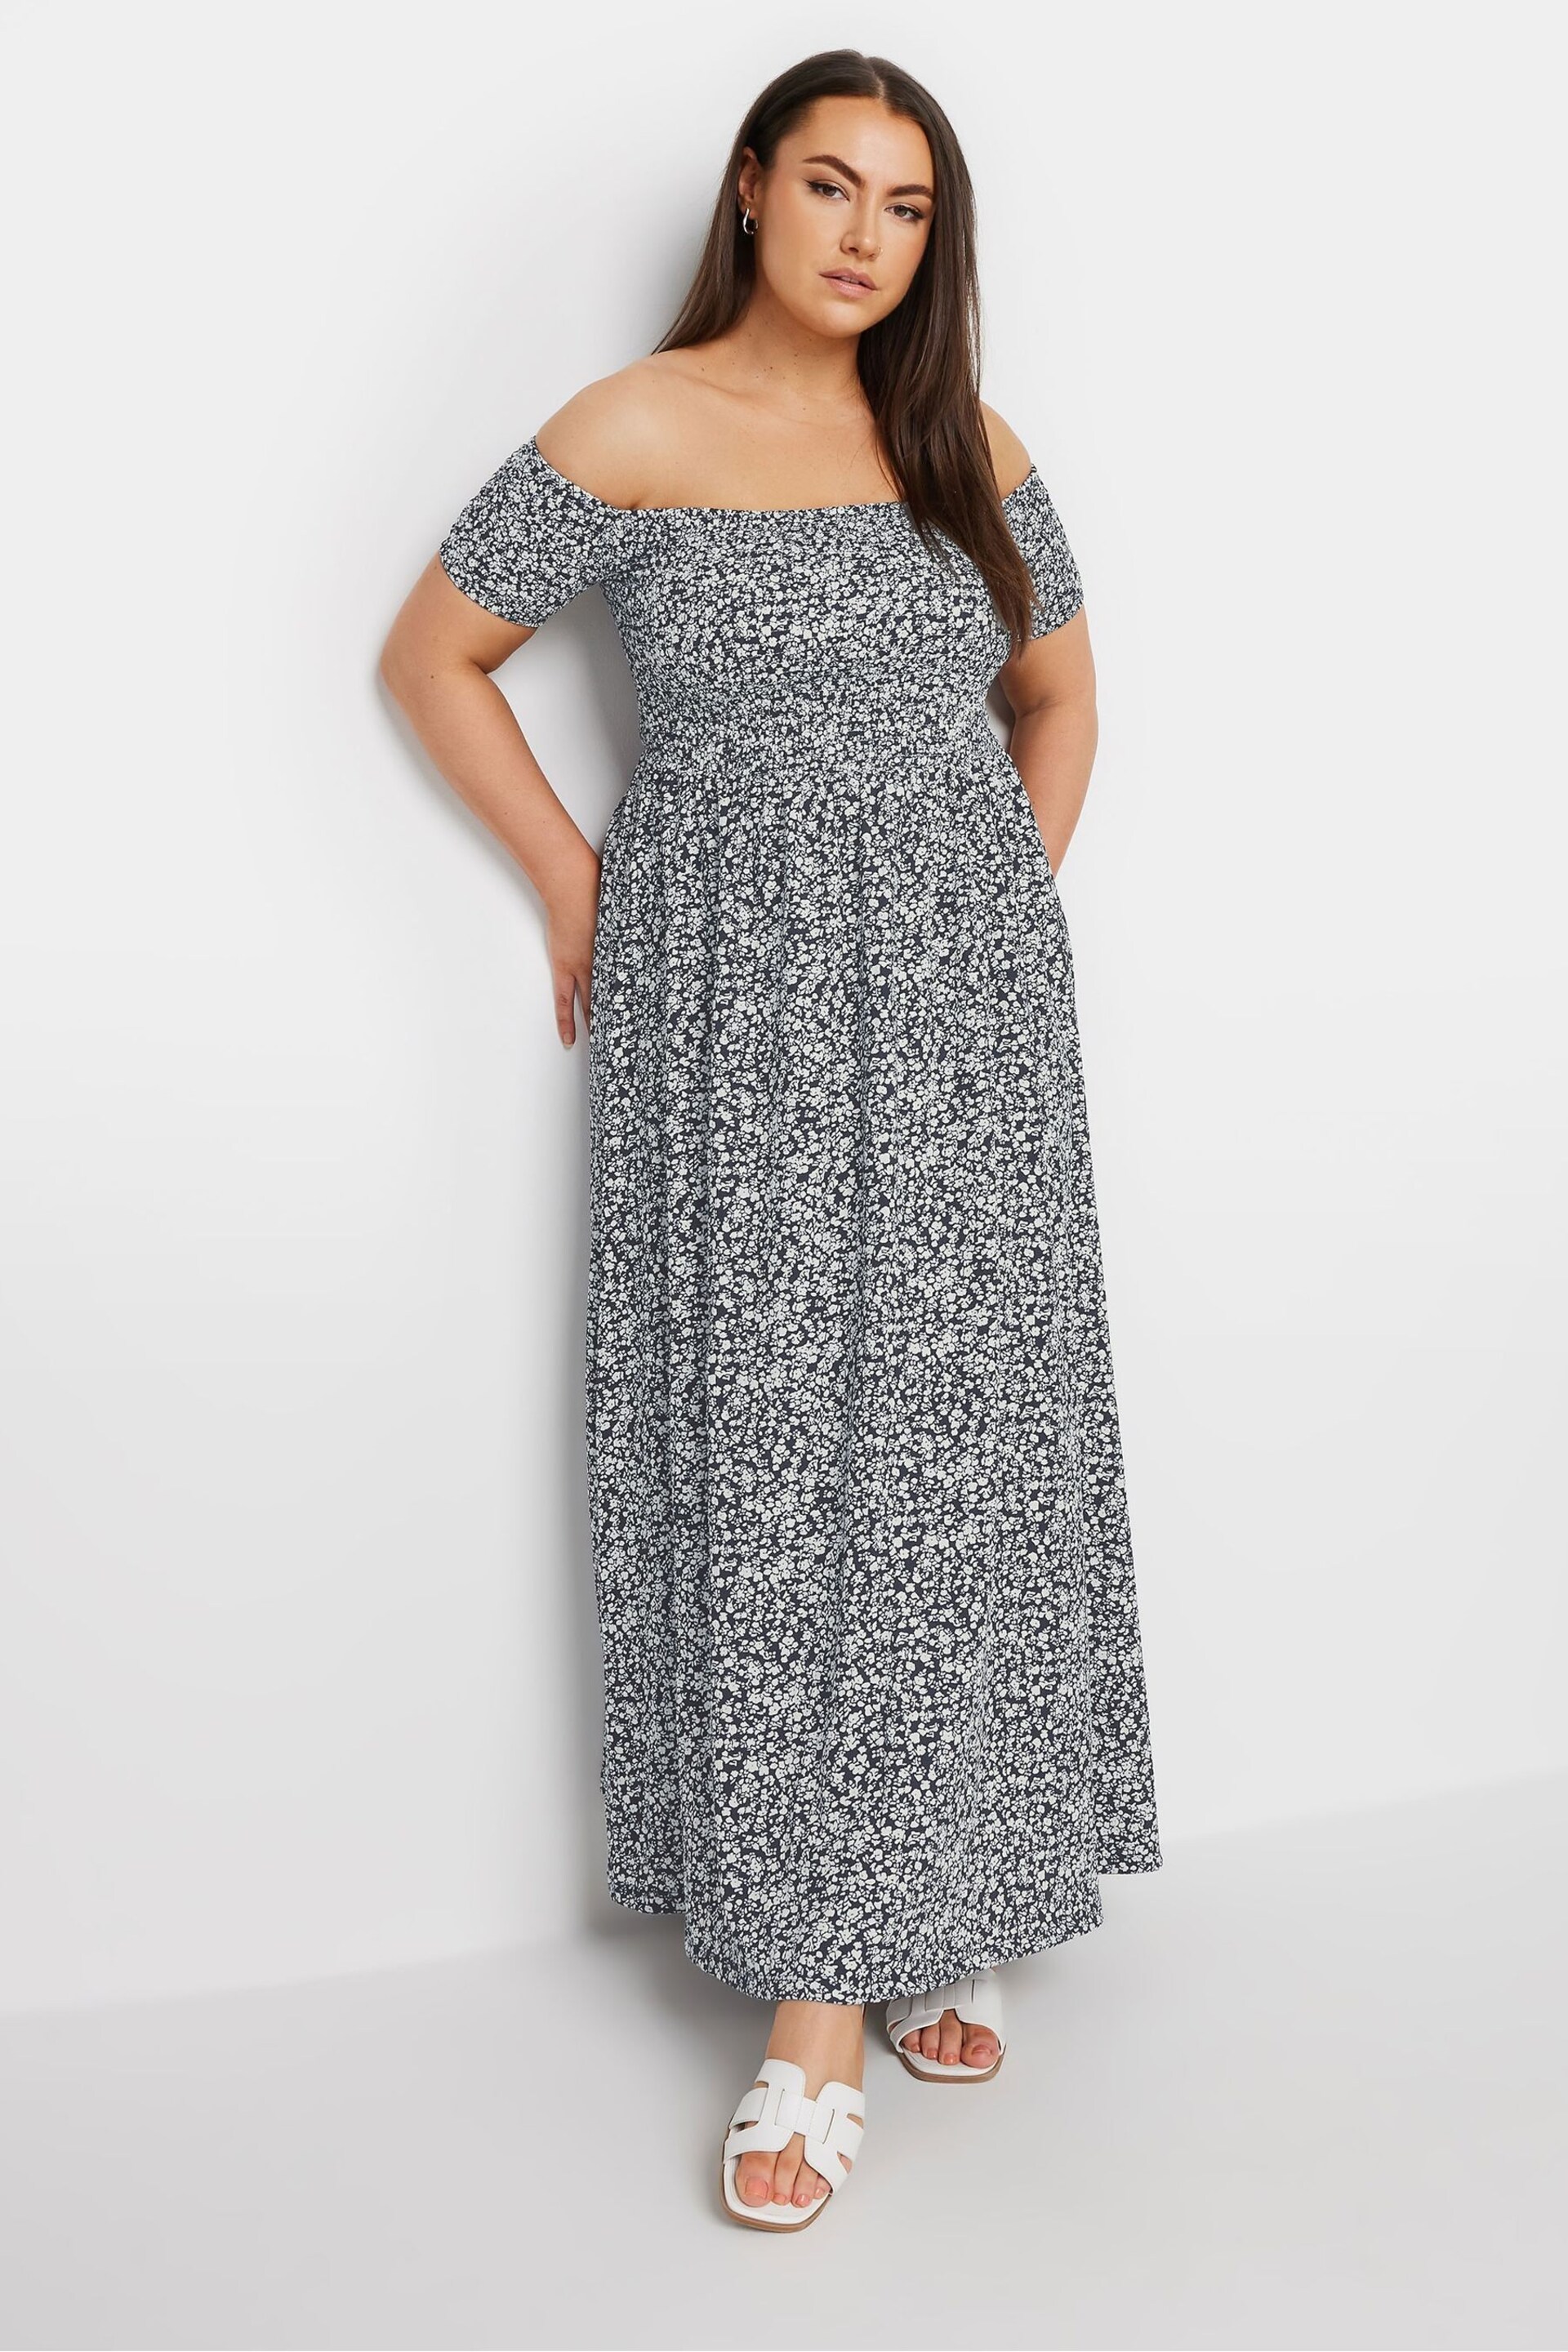 Yours Curve Blue Dark Ditsy Shirred Midaxi Dress - Image 1 of 5